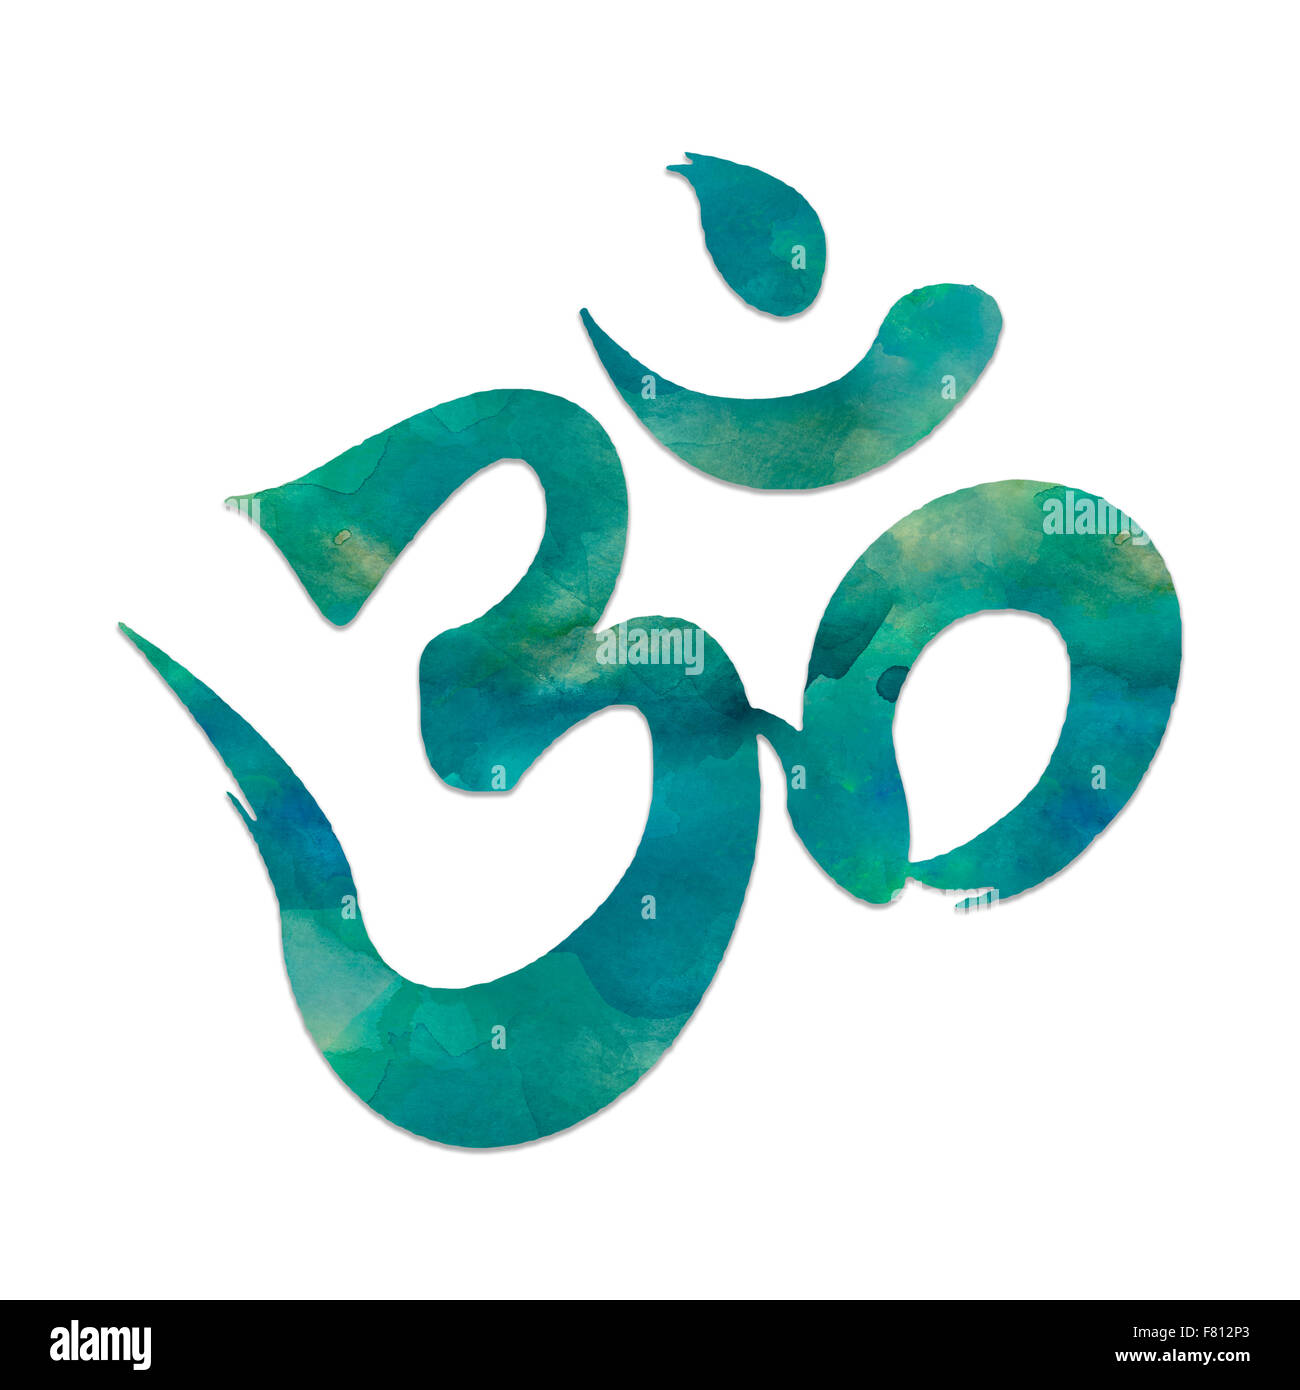 Image of the mantra symbol, OHM, used in meditation and yoga. Stock Photo